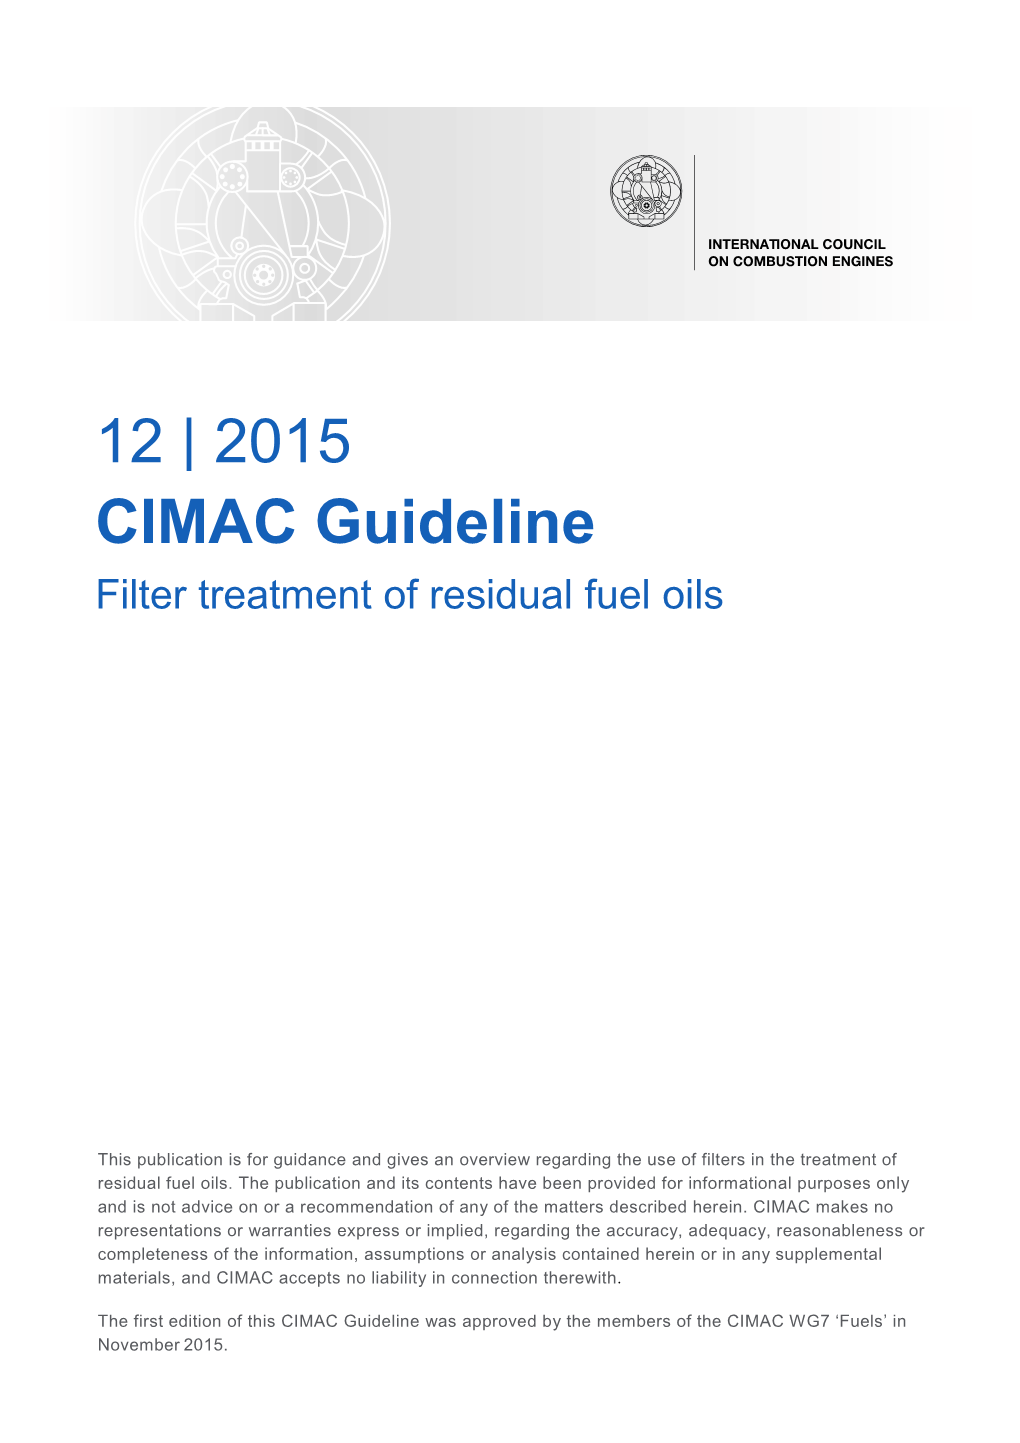 Guideline on Filter Treatment of Residual Fuel Oils [PDF]